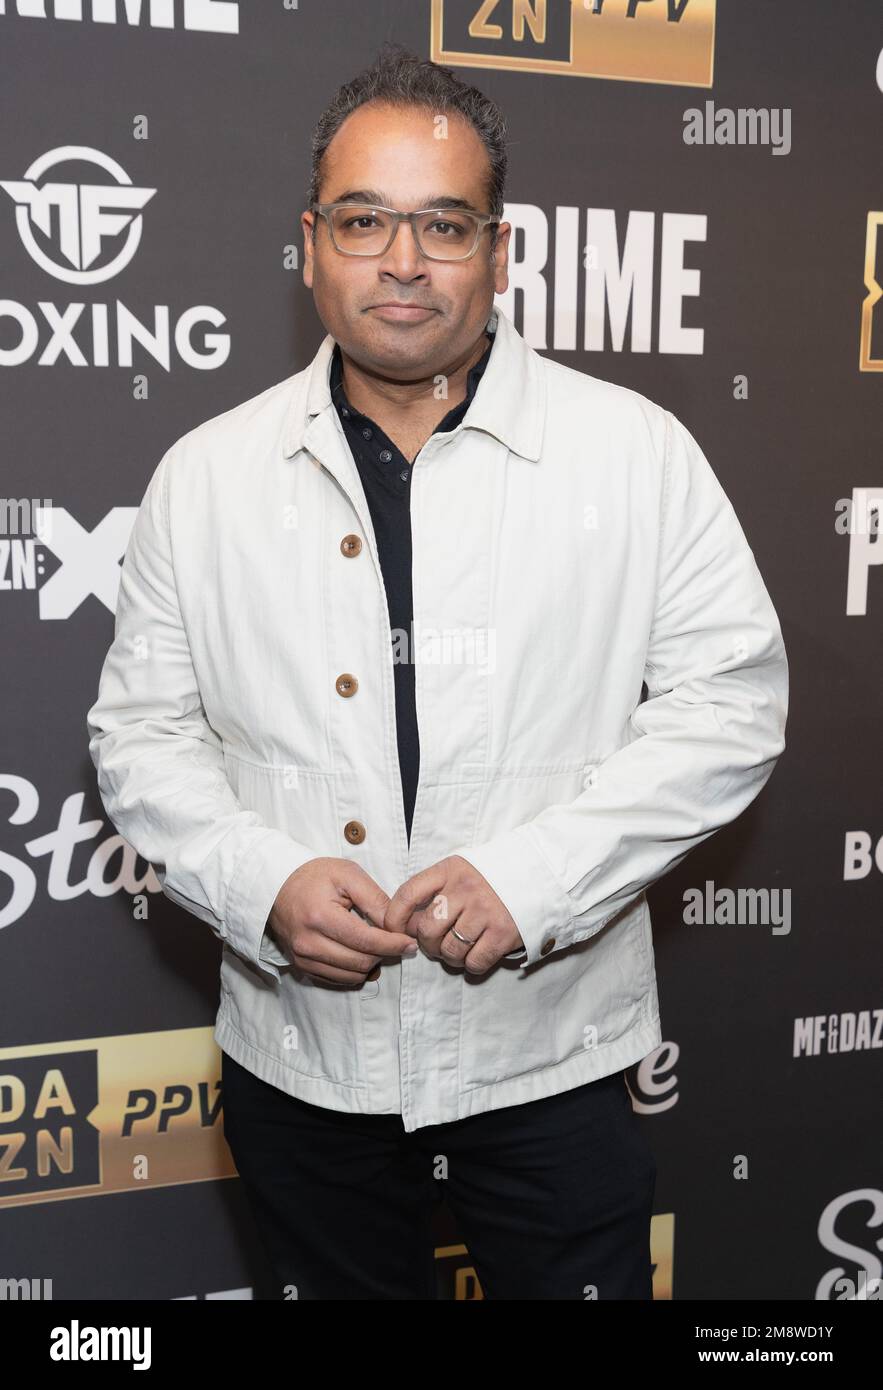 London, UK. 14 January, 2023. Krishnan Guru-Murthy attends the Arrivals at the KSI v FaZe Temperrr fight - London at OVO Wembley Arena in London, England.  Credit: S.A.M./Alamy Live News Stock Photo